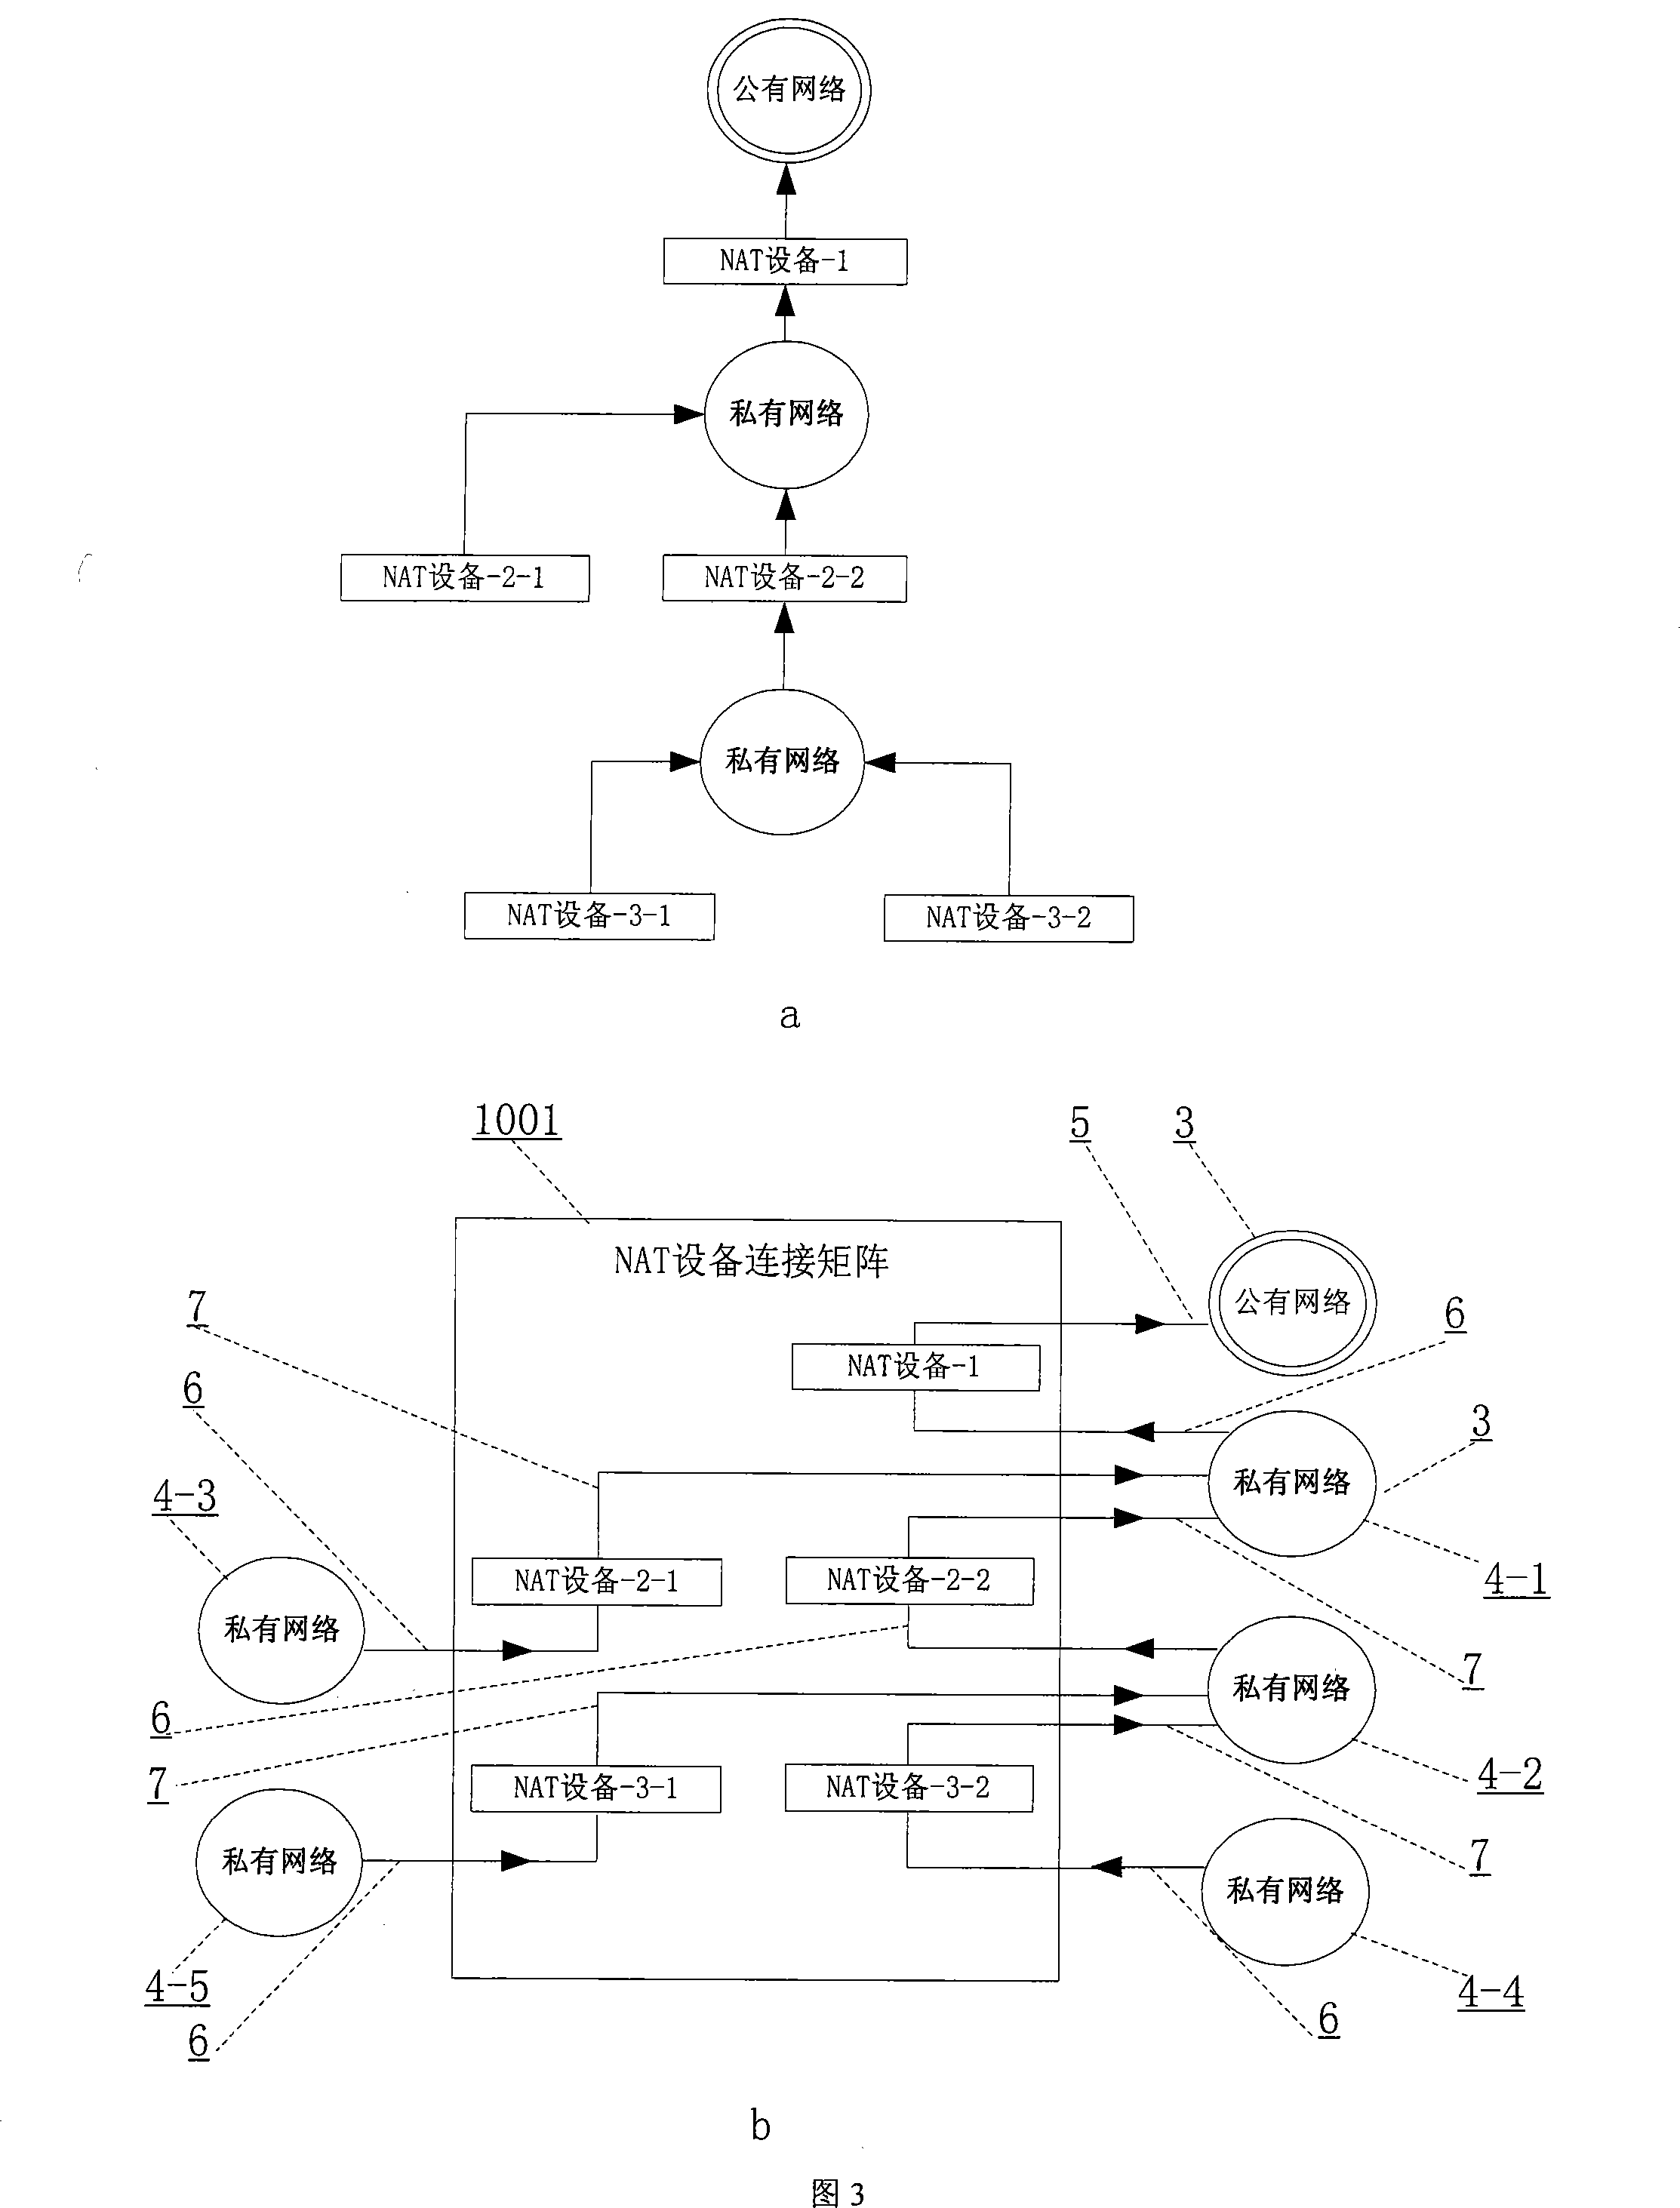 Service resource address acquisition system and method in multi-layer NAT network under one root